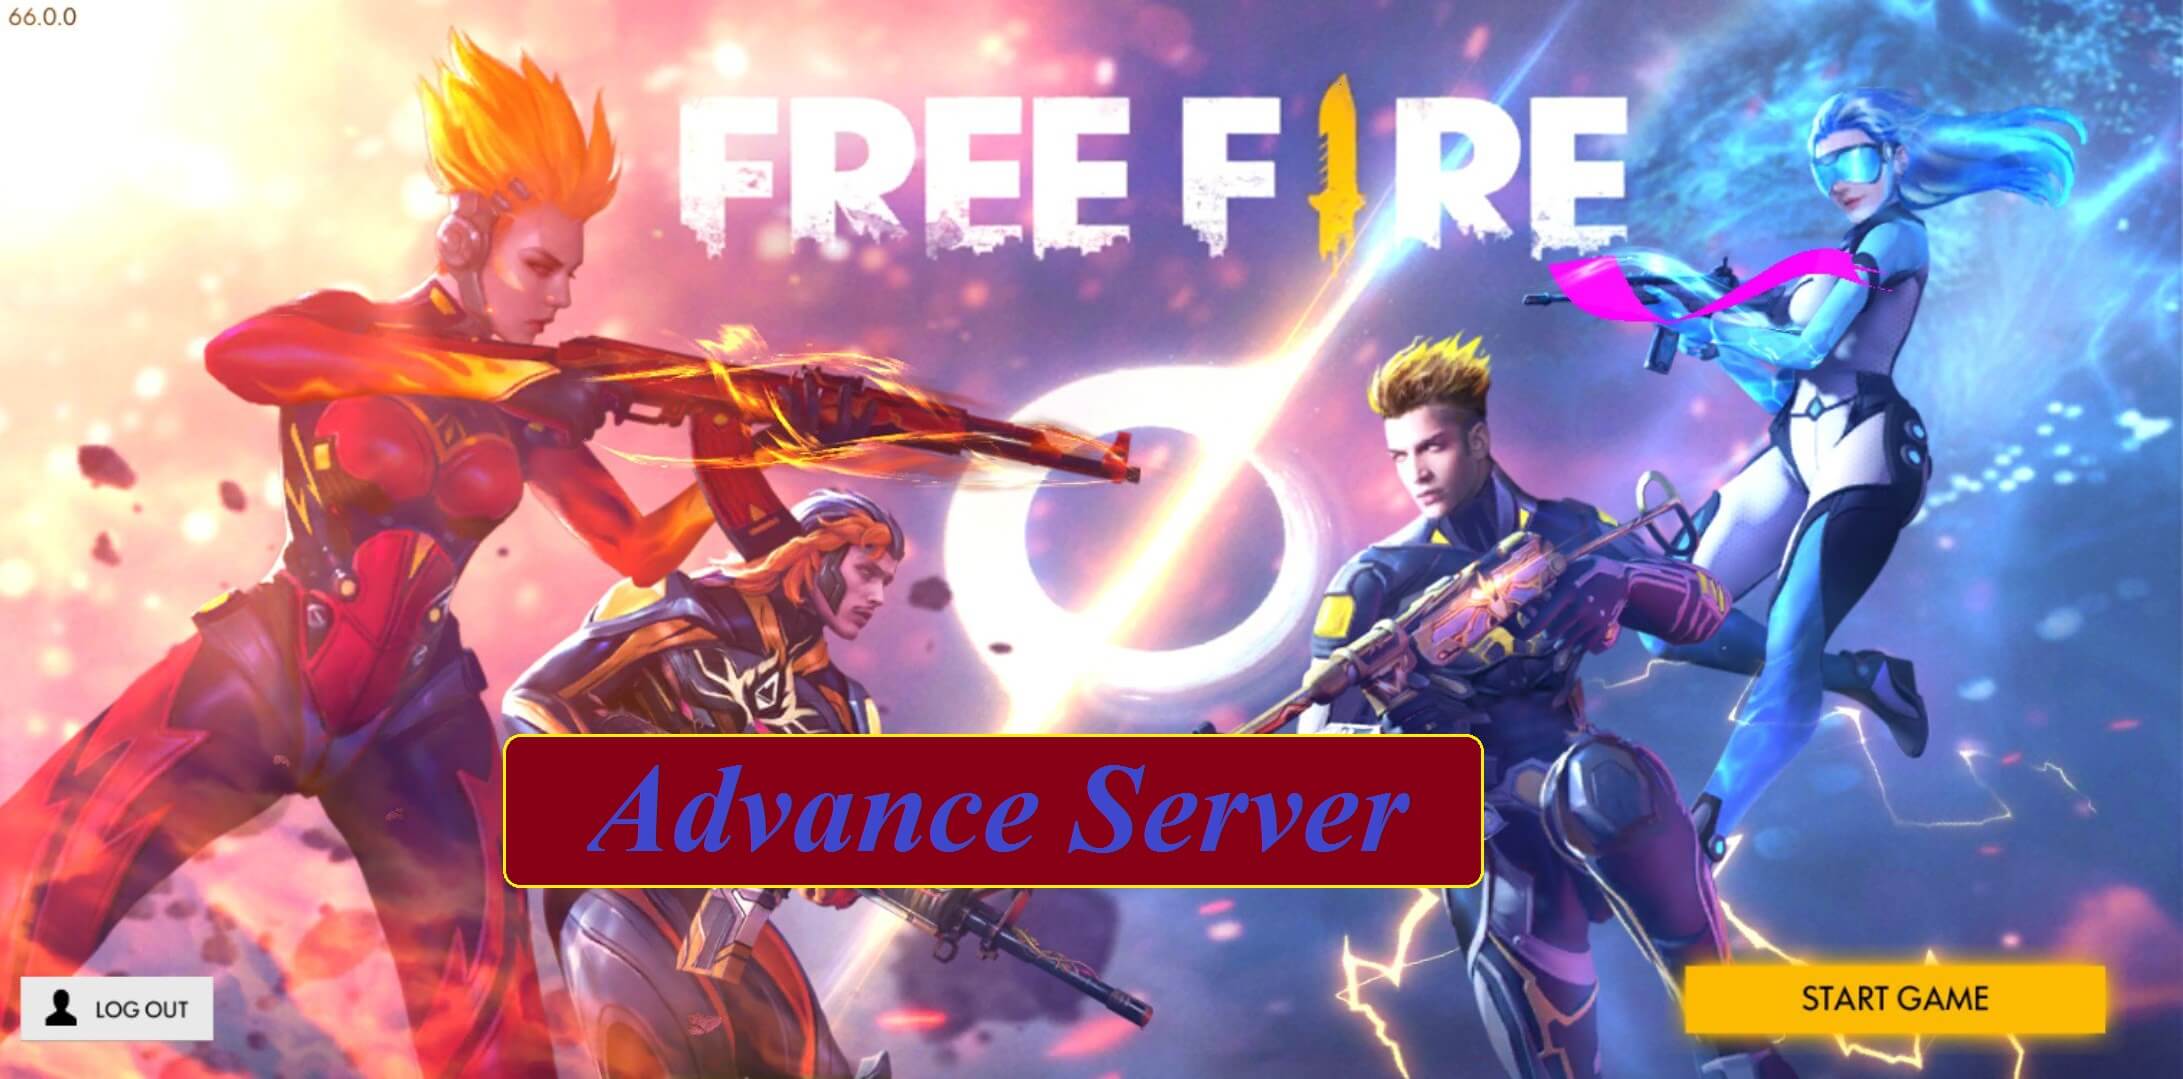 Download Garena Free Fire Advance Server On Android ...